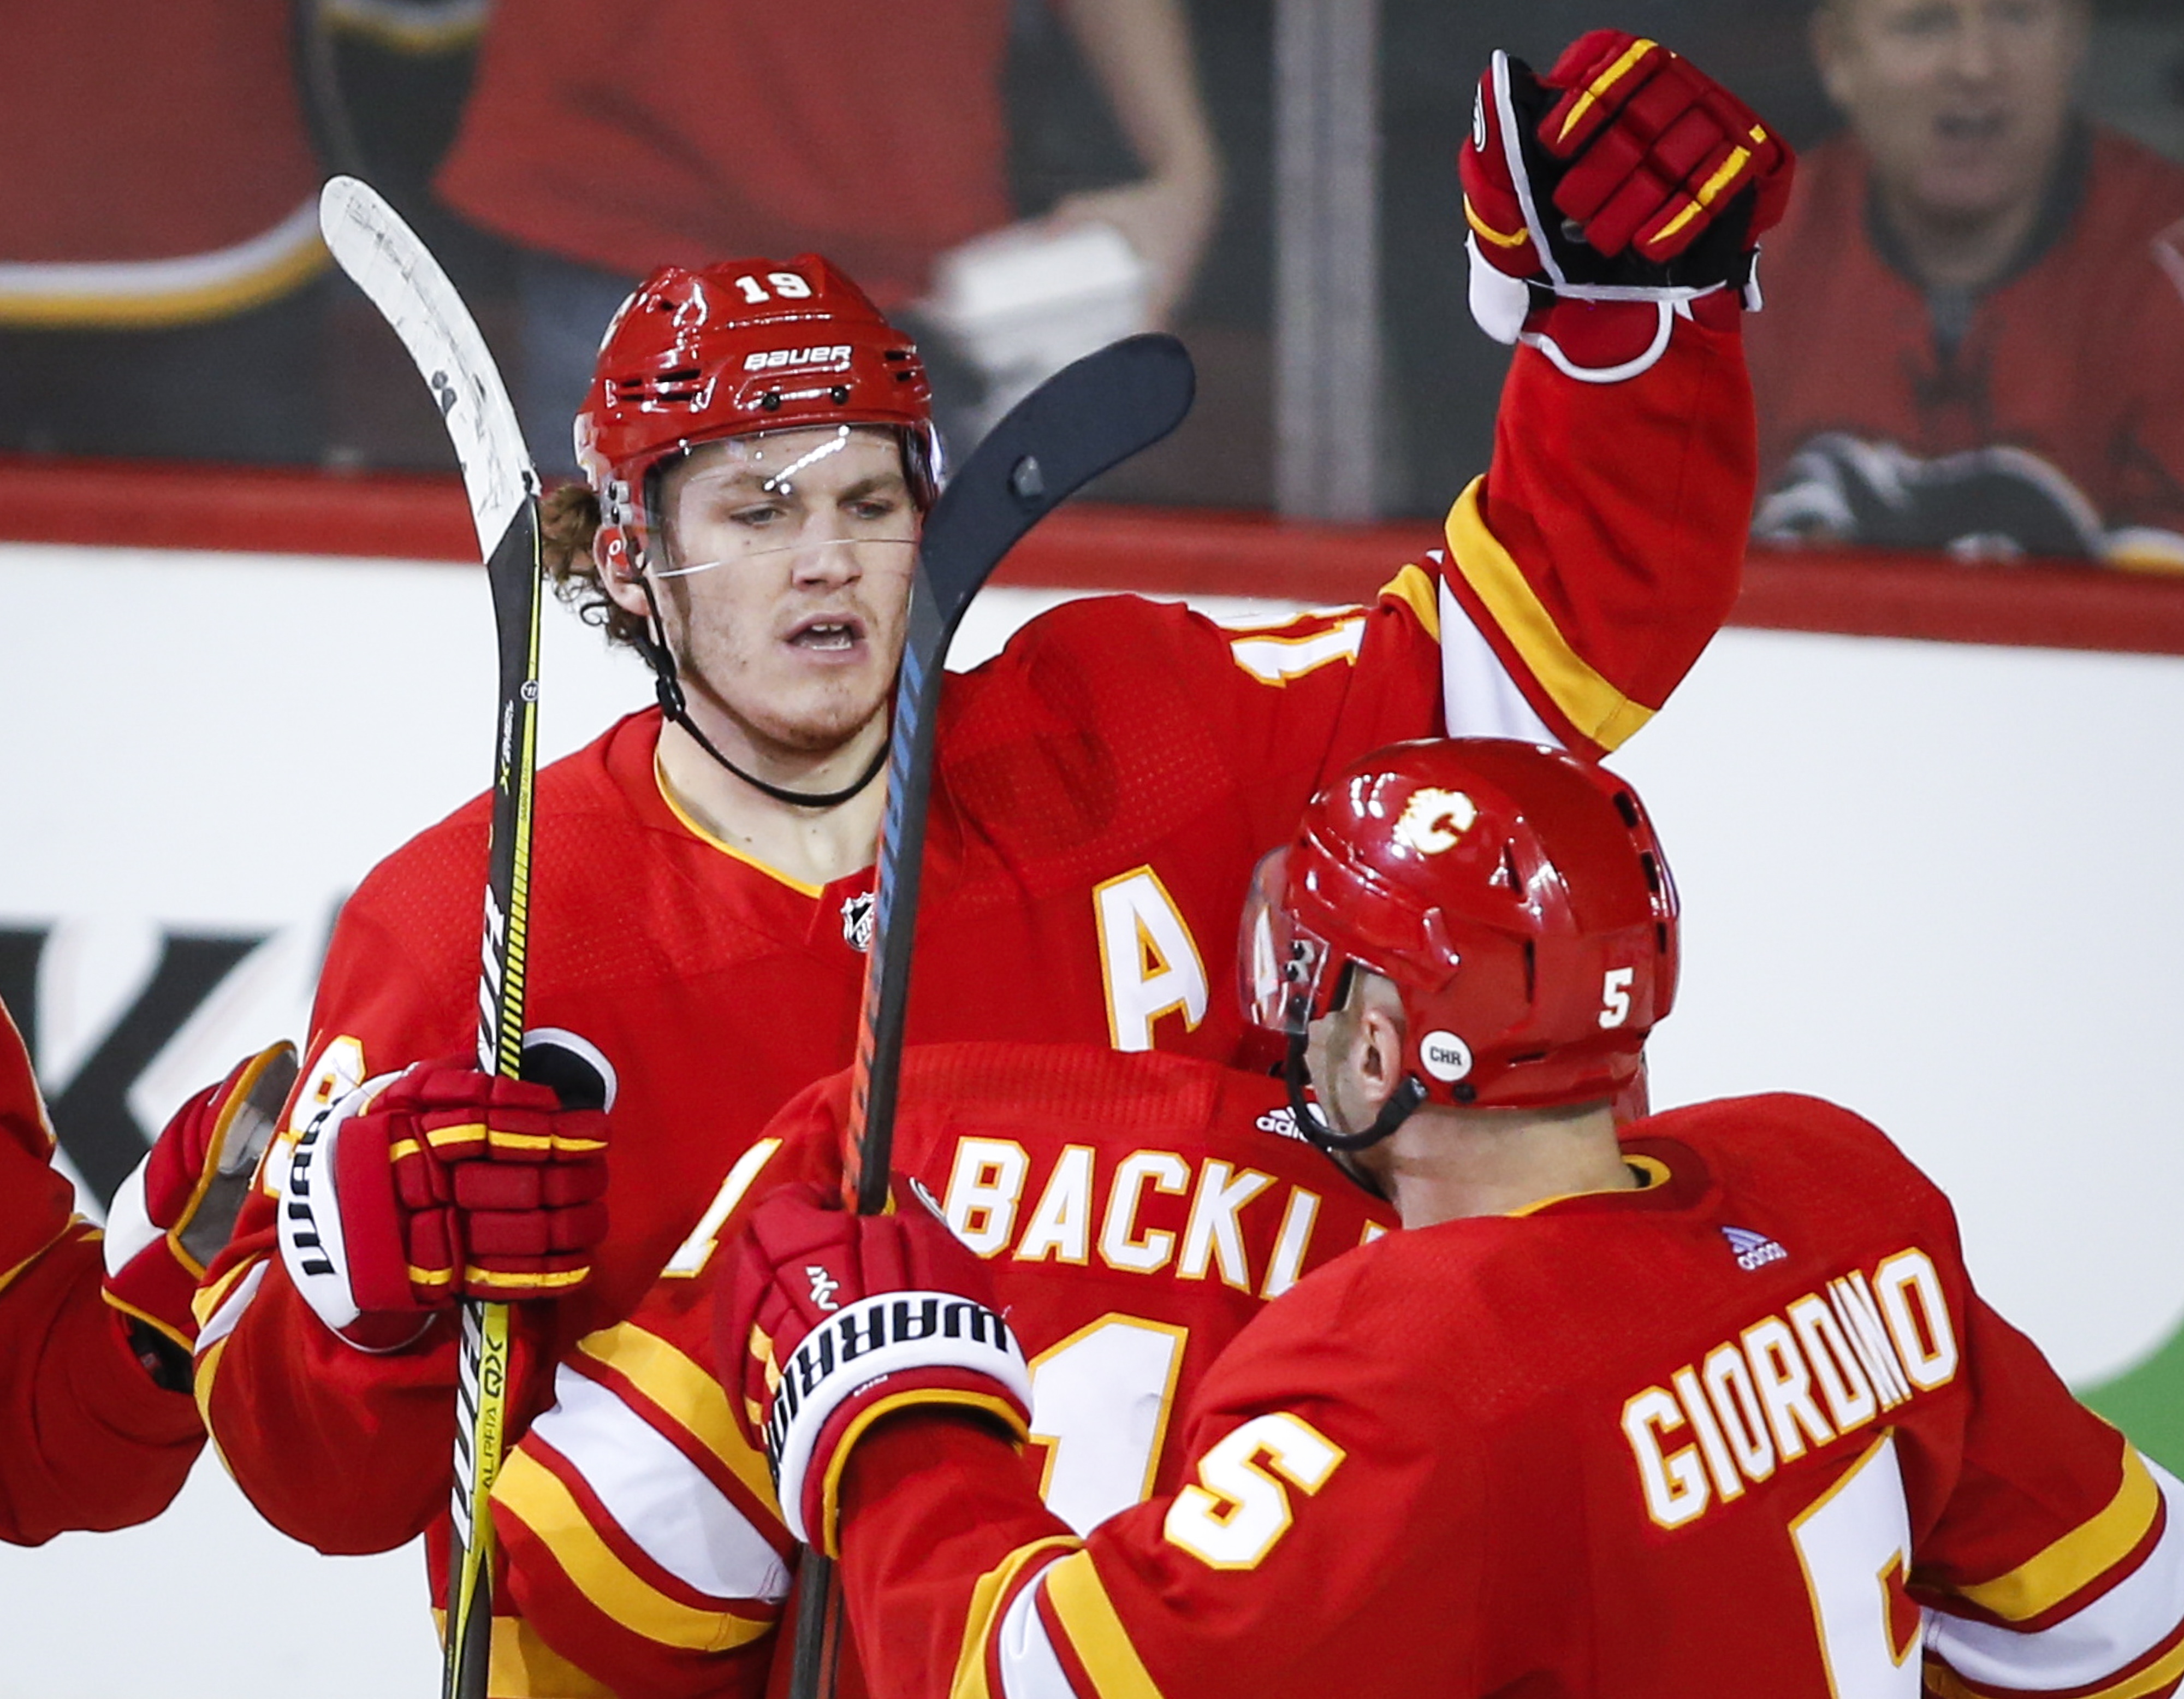 Tkachuk’s 5-point game leads Flames past Rangers 5-1